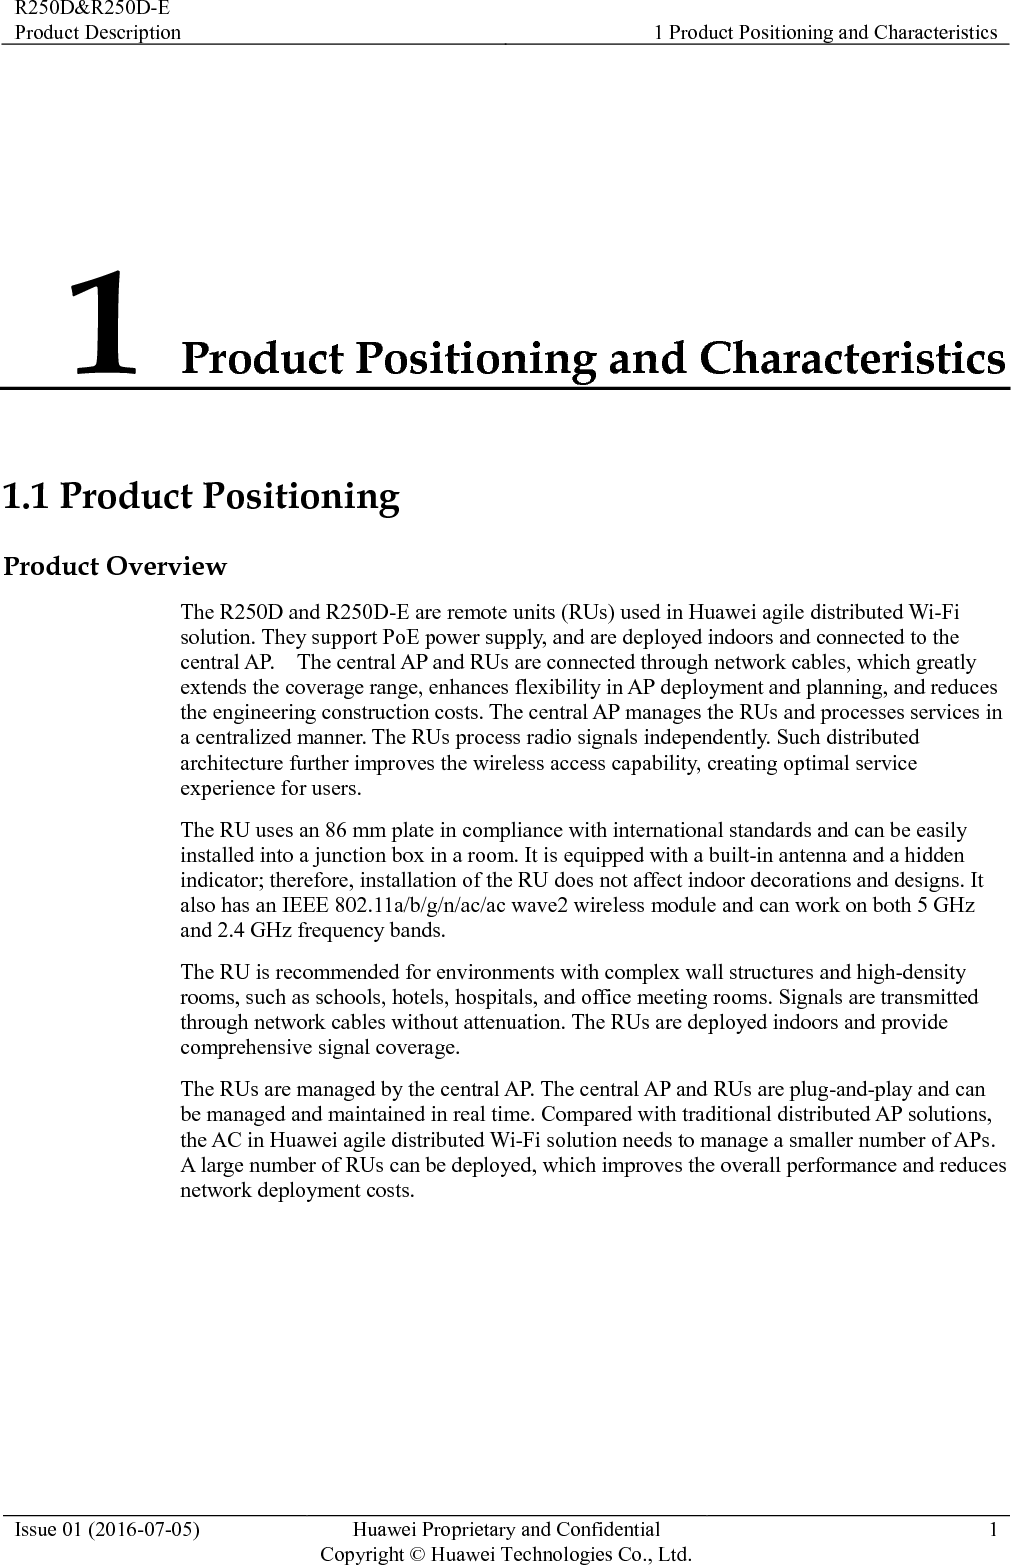 R250D&amp;R250D-E Product Description 1 Product Positioning and Characteristics  Issue 01 (2016-07-05) Huawei Proprietary and Confidential                                     Copyright © Huawei Technologies Co., Ltd. 1  1 Product Positioning and Characteristics 1.1 Product Positioning Product Overview The R250D and R250D-E are remote units (RUs) used in Huawei agile distributed Wi-Fi solution. They support PoE power supply, and are deployed indoors and connected to the central AP.    The central AP and RUs are connected through network cables, which greatly extends the coverage range, enhances flexibility in AP deployment and planning, and reduces the engineering construction costs. The central AP manages the RUs and processes services in a centralized manner. The RUs process radio signals independently. Such distributed architecture further improves the wireless access capability, creating optimal service experience for users. The RU uses an 86 mm plate in compliance with international standards and can be easily installed into a junction box in a room. It is equipped with a built-in antenna and a hidden indicator; therefore, installation of the RU does not affect indoor decorations and designs. It also has an IEEE 802.11a/b/g/n/ac/ac wave2 wireless module and can work on both 5 GHz and 2.4 GHz frequency bands. The RU is recommended for environments with complex wall structures and high-density rooms, such as schools, hotels, hospitals, and office meeting rooms. Signals are transmitted through network cables without attenuation. The RUs are deployed indoors and provide comprehensive signal coverage. The RUs are managed by the central AP. The central AP and RUs are plug-and-play and can be managed and maintained in real time. Compared with traditional distributed AP solutions, the AC in Huawei agile distributed Wi-Fi solution needs to manage a smaller number of APs. A large number of RUs can be deployed, which improves the overall performance and reduces network deployment costs. 